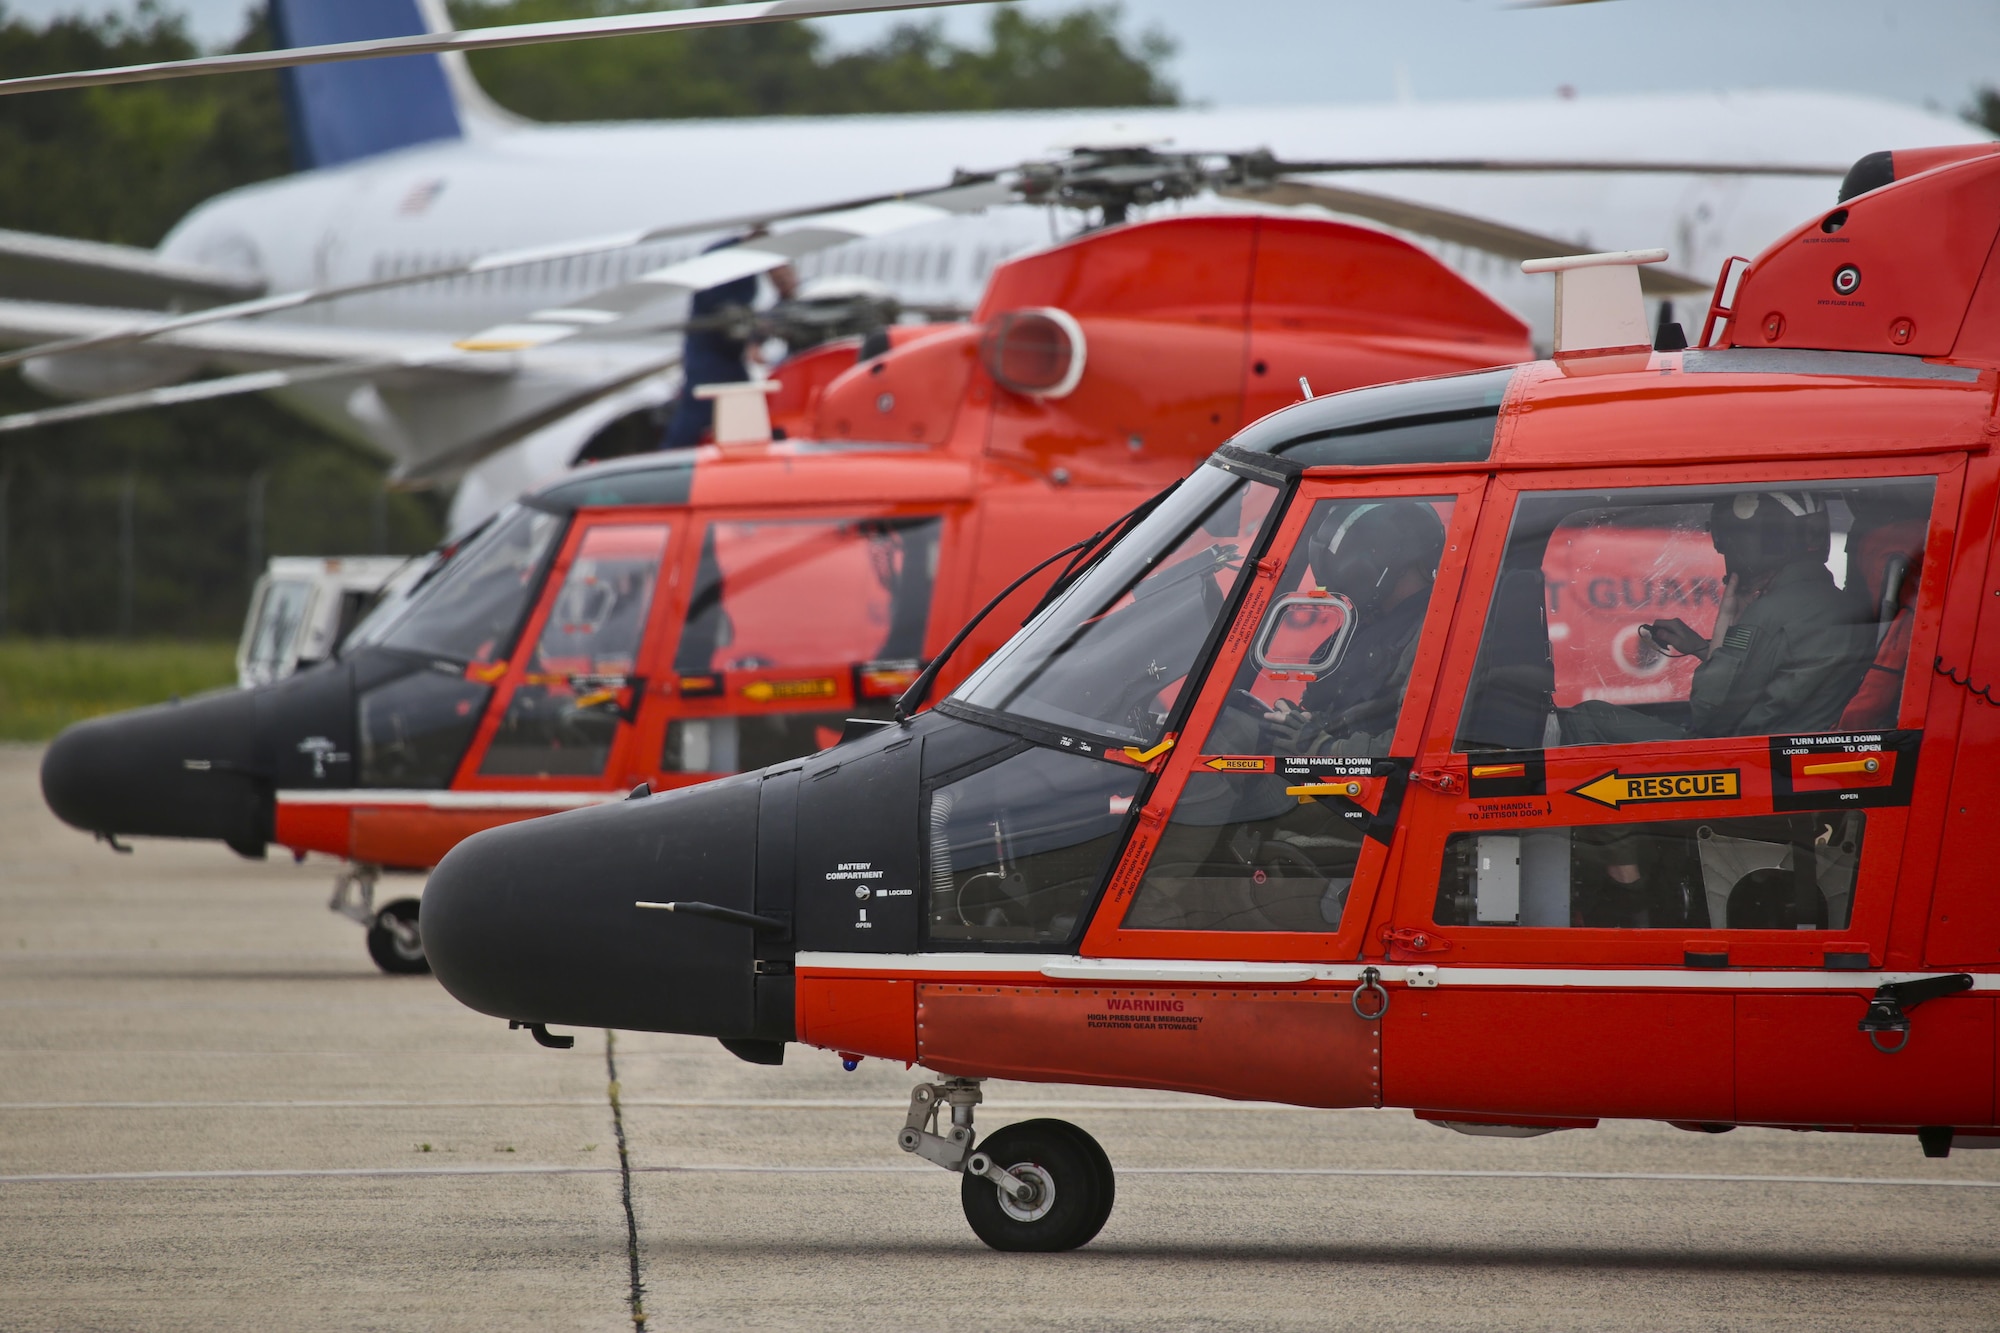 U.S. Coast Guard HH-65C Dolphin helicopters from Coast Guard Air Station Atlantic City are prepared for a mission during a three-day Aeropsace Control Alert CrossTell live-fly training exercise at Atlantic City International Airport, N.J., May 24, 2017. Representatives from the Air National Guard fighter wings, Civil Air Patrol, and U.S. Coast Guard rotary-wing air intercept units will conduct daily sorties from May 23-25 to hone their skills with tactical-level air-intercept procedures. (U.S. Air National Guard photo by Master Sgt. Matt Hecht/Released)